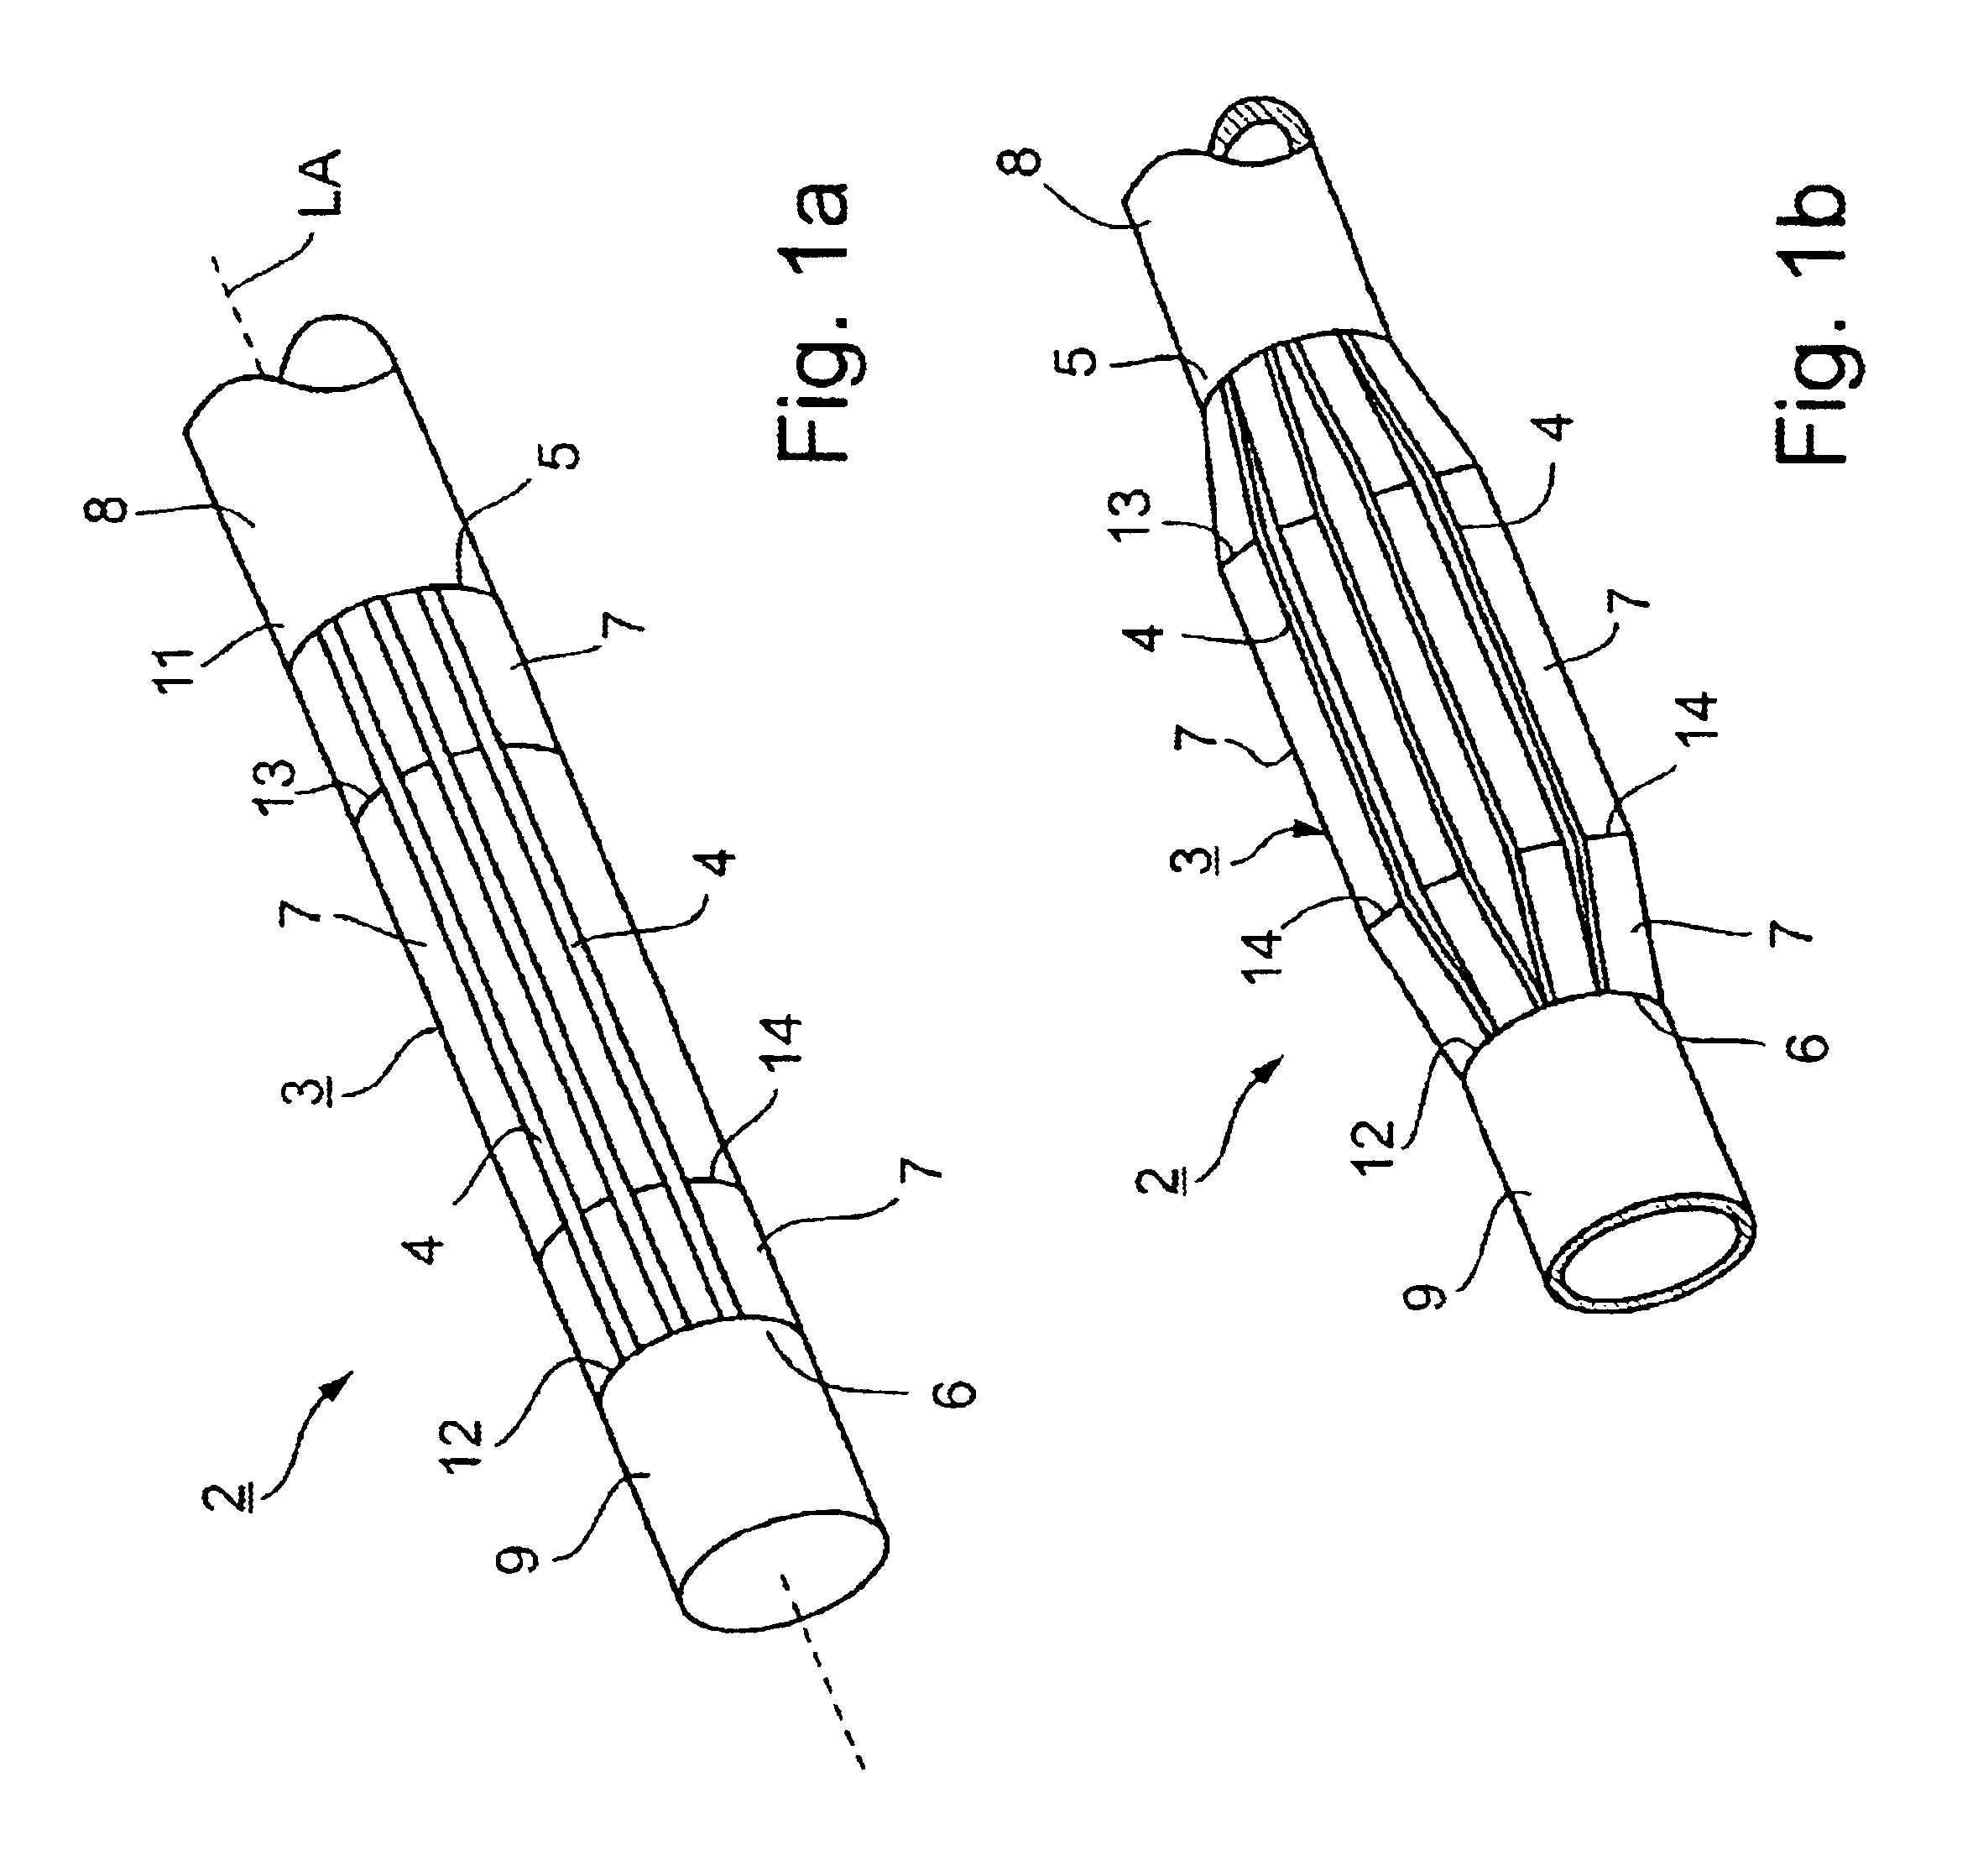 Expandable delivery appliance particularly for delivering intravascular devices